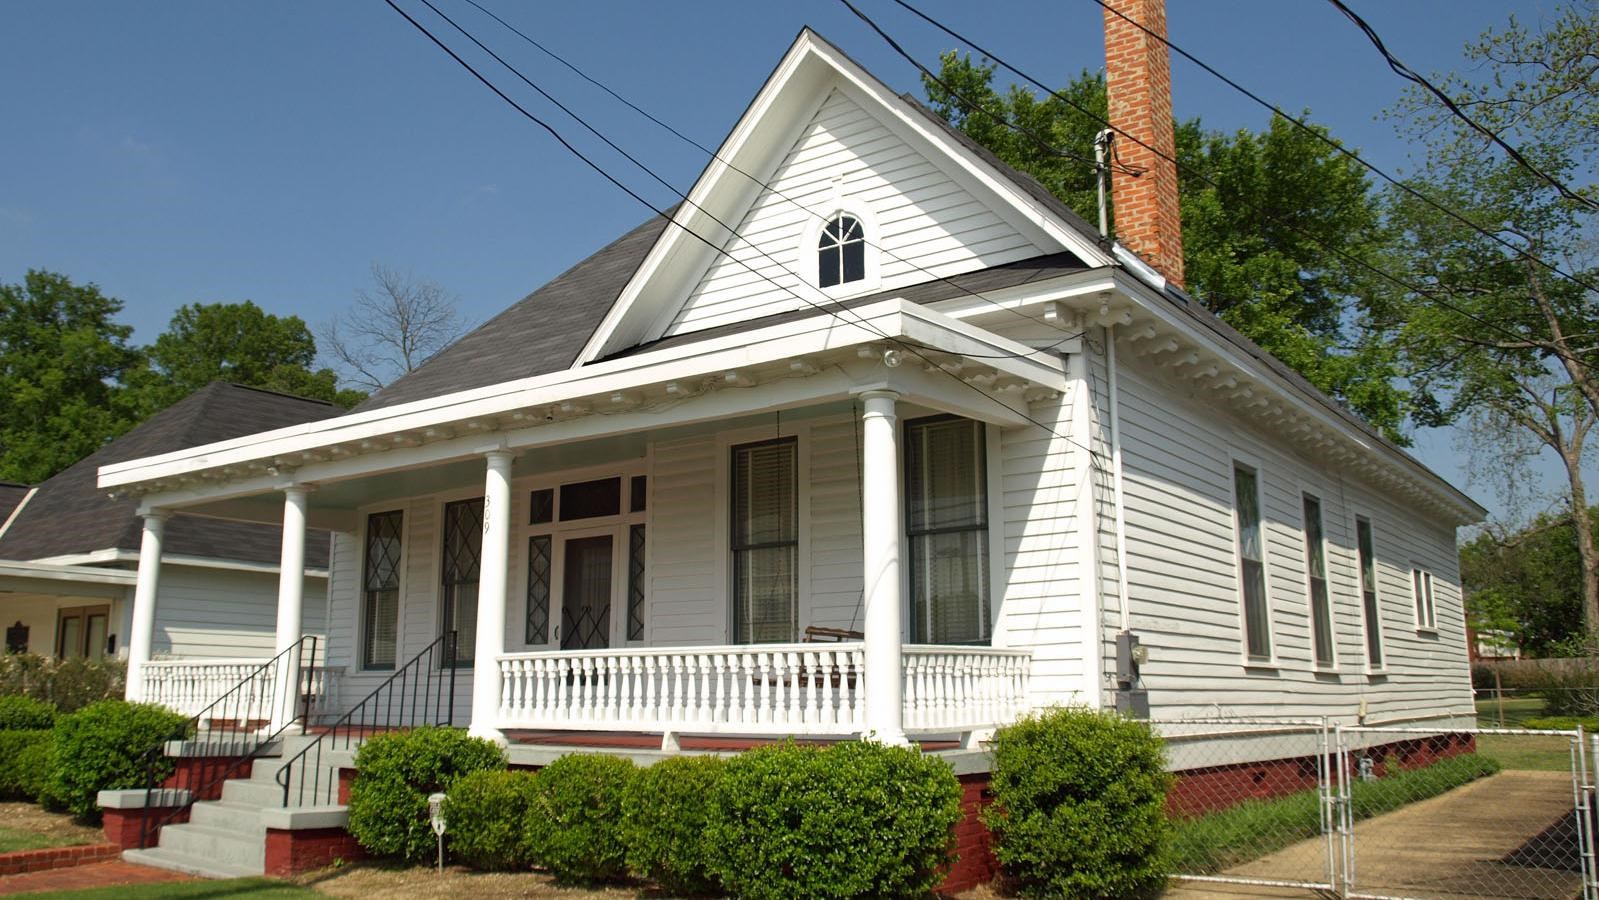 One-and-a-half story white home with large front porch. Photo by Chris Pruitt, CC BY-SA 3.0